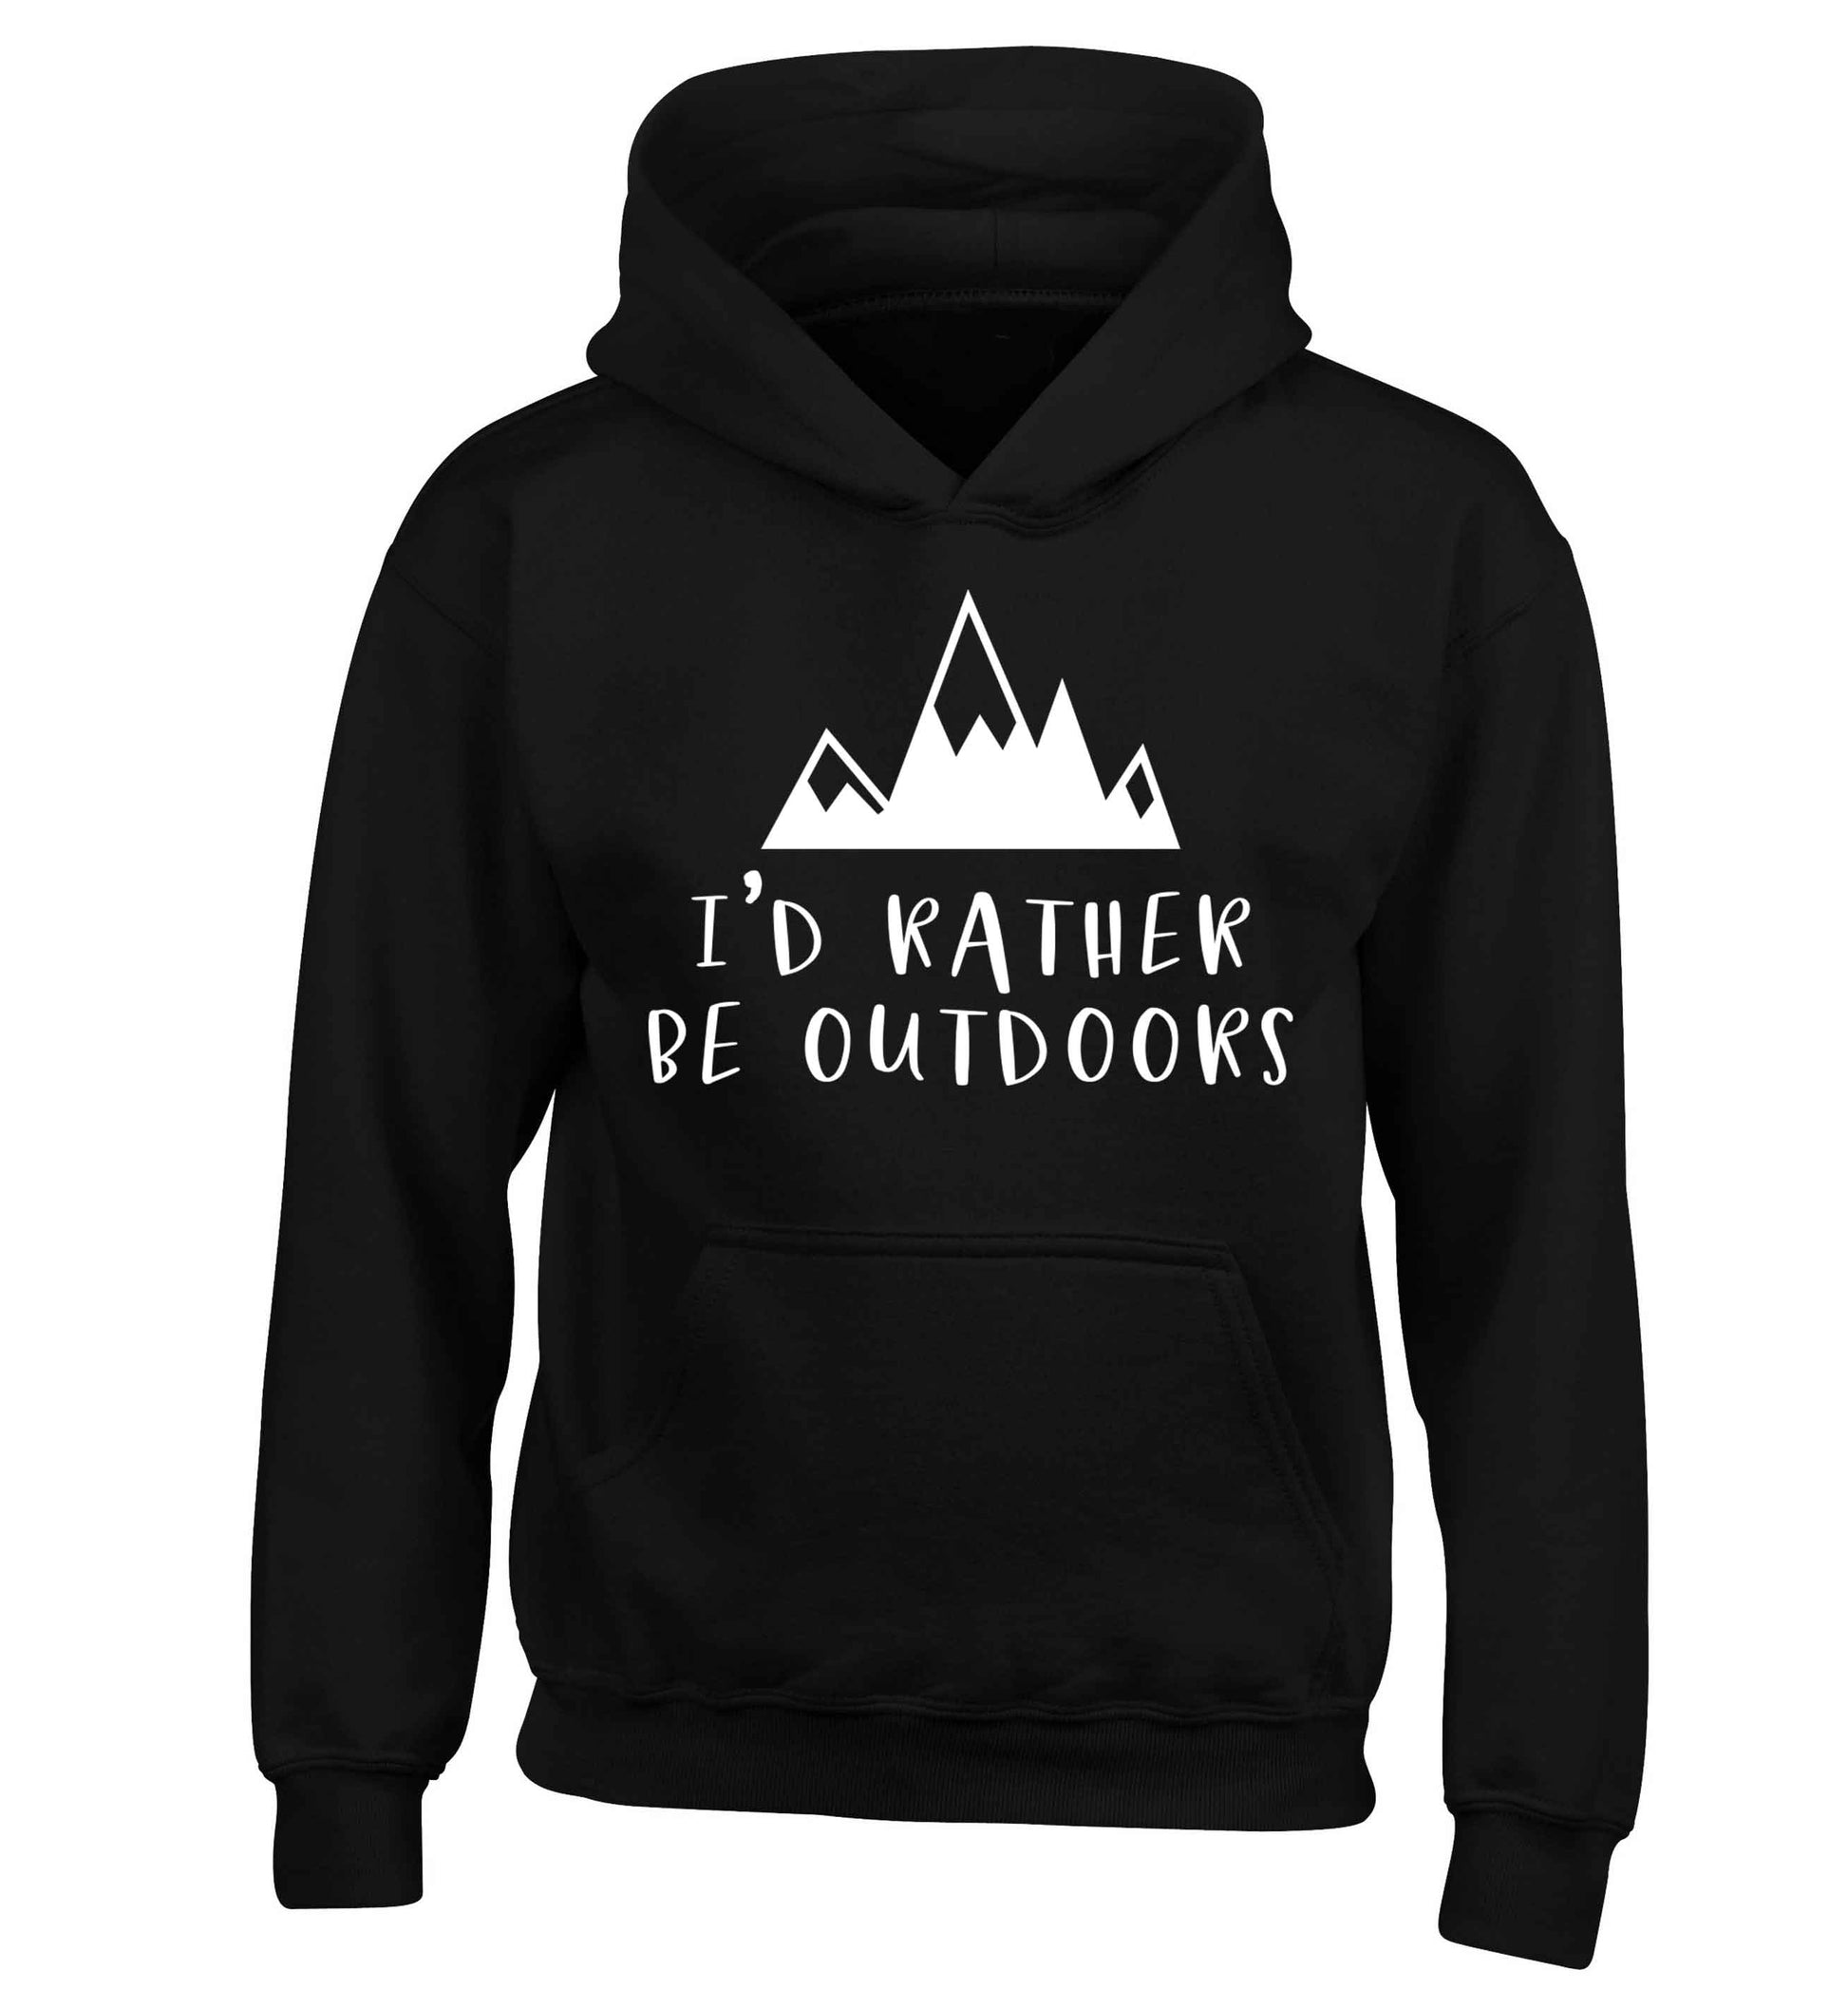 I'd rather be outdoors children's black hoodie 12-13 Years